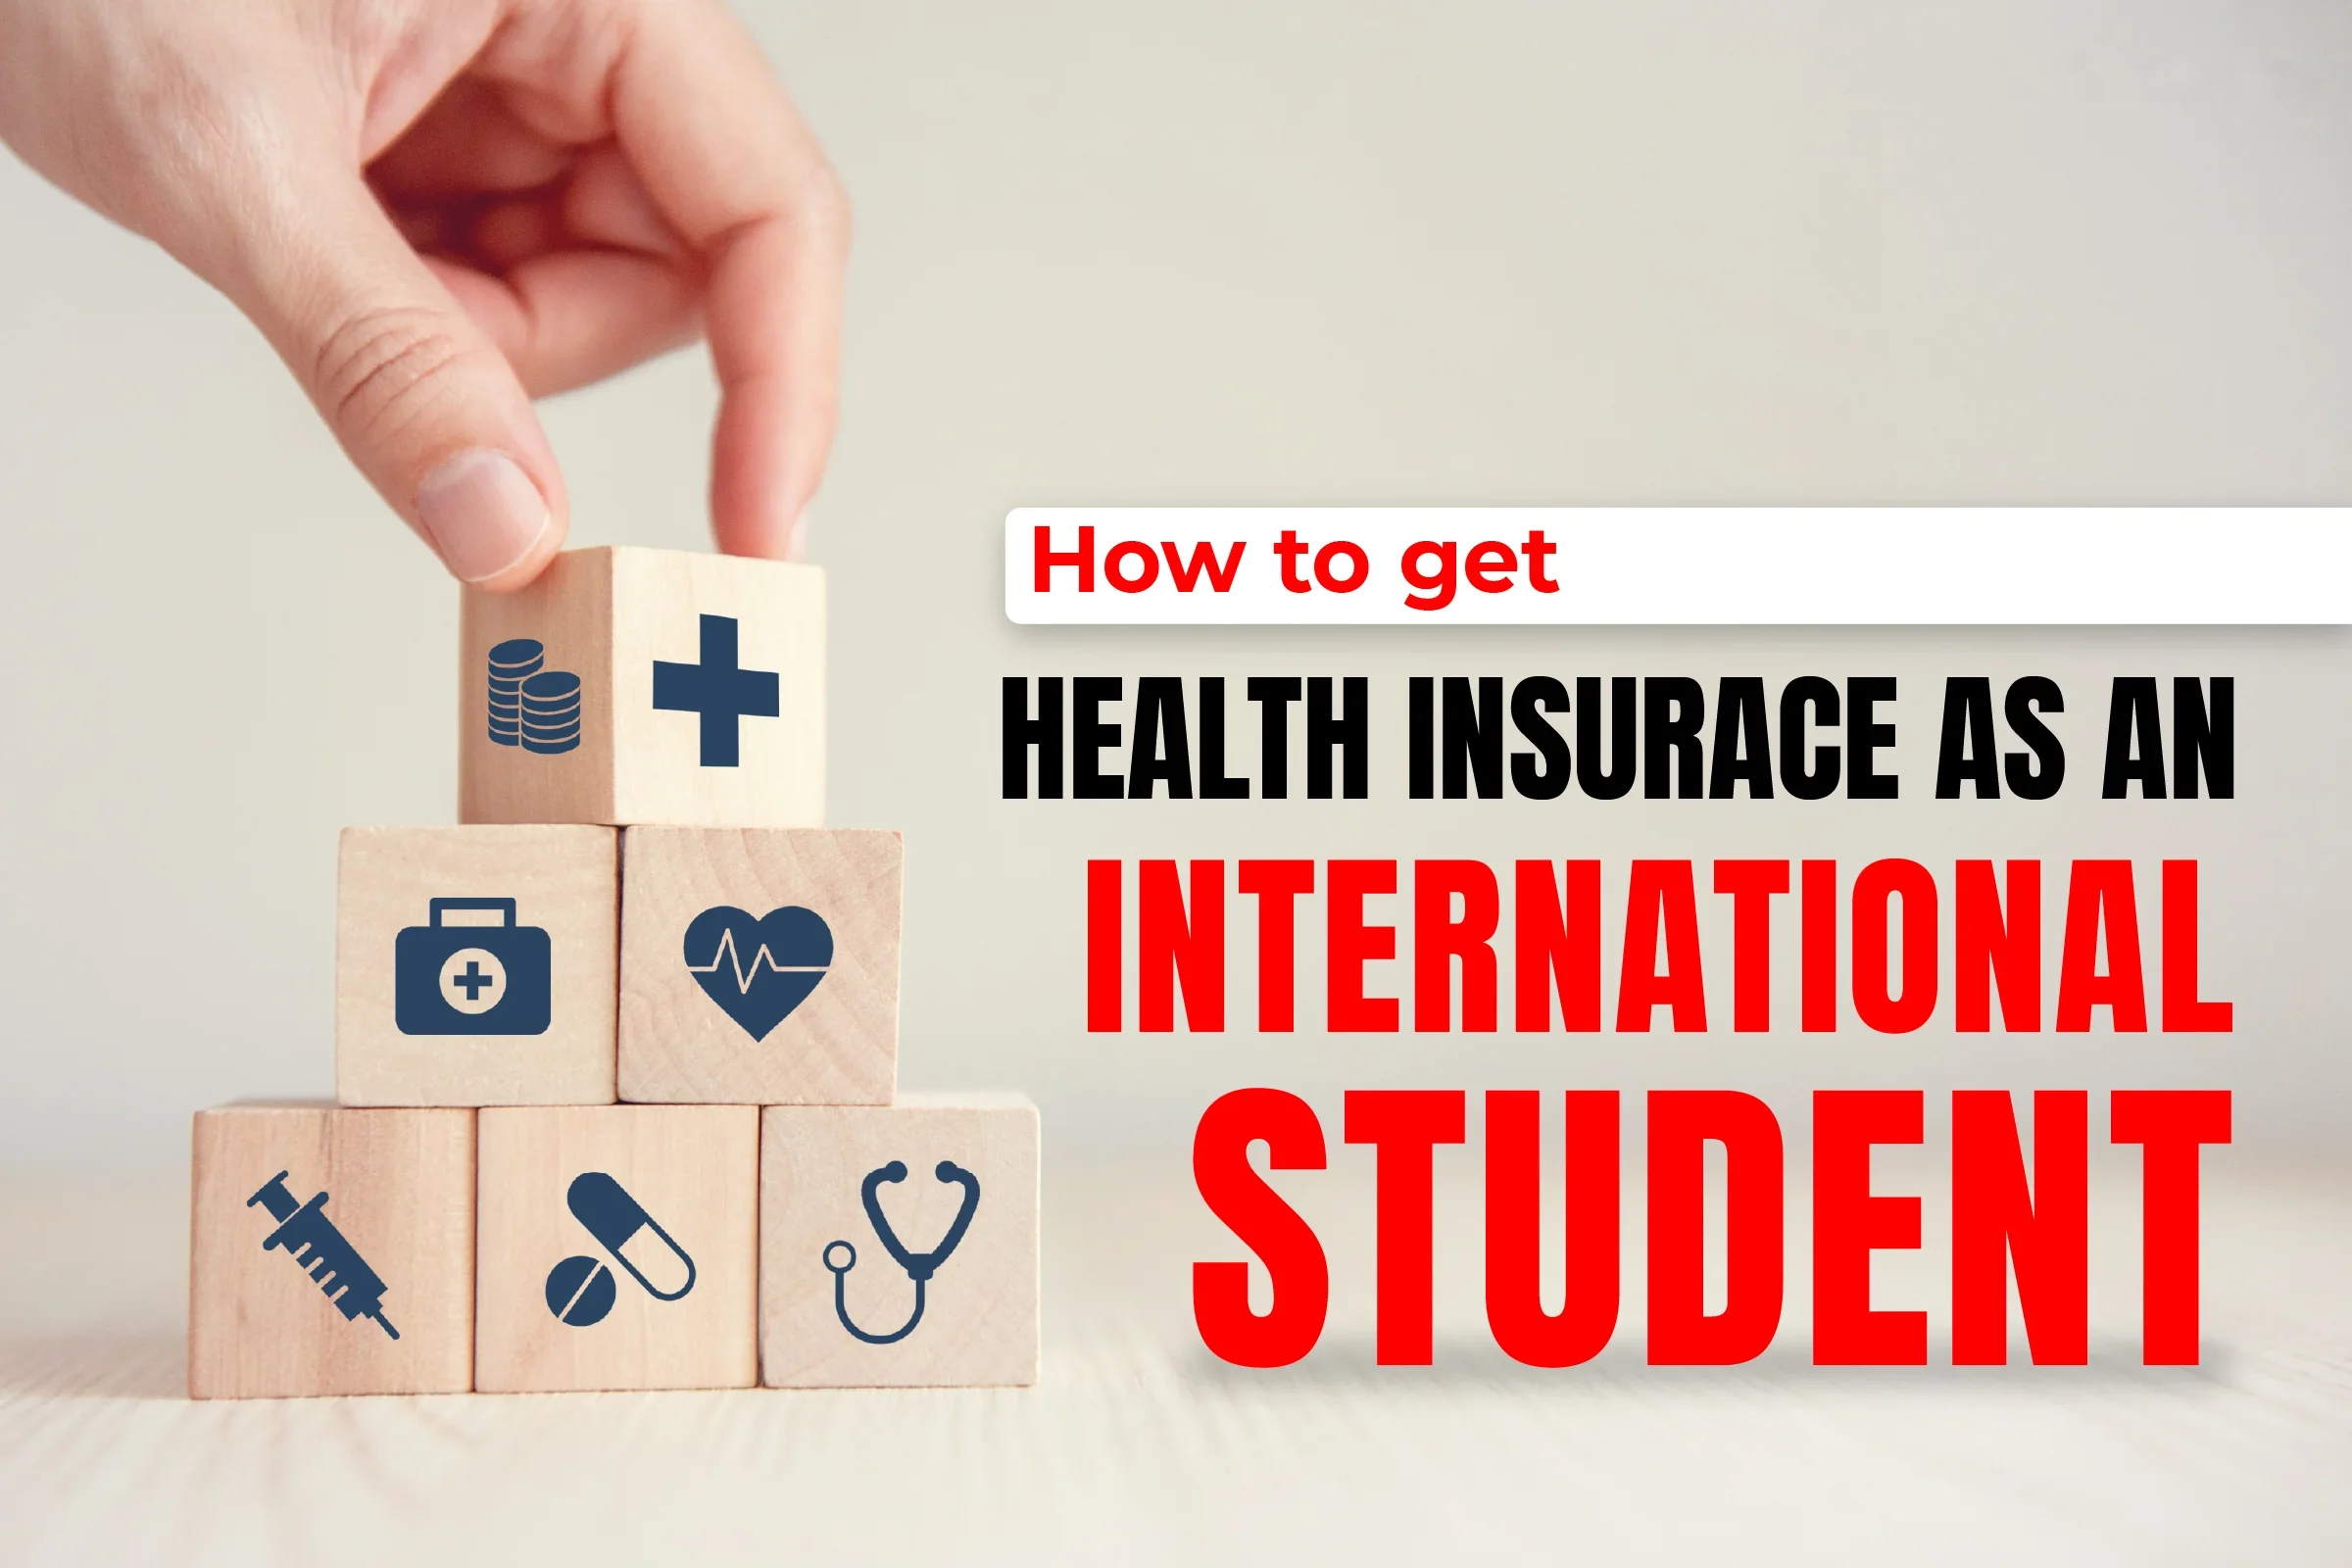 International Student Health Insurance Requirements in the USA